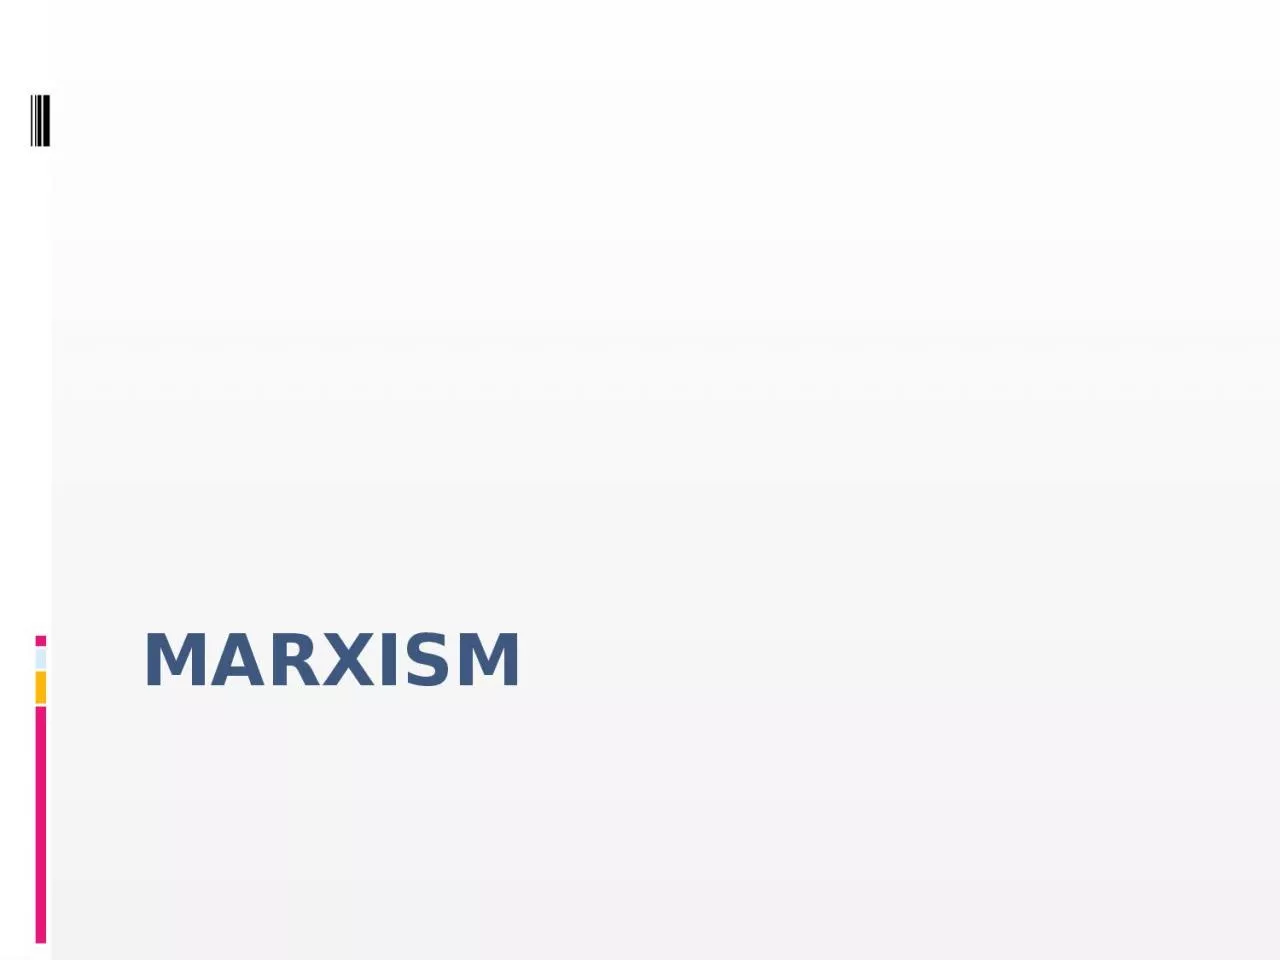 MARXISM Marxism is a body of